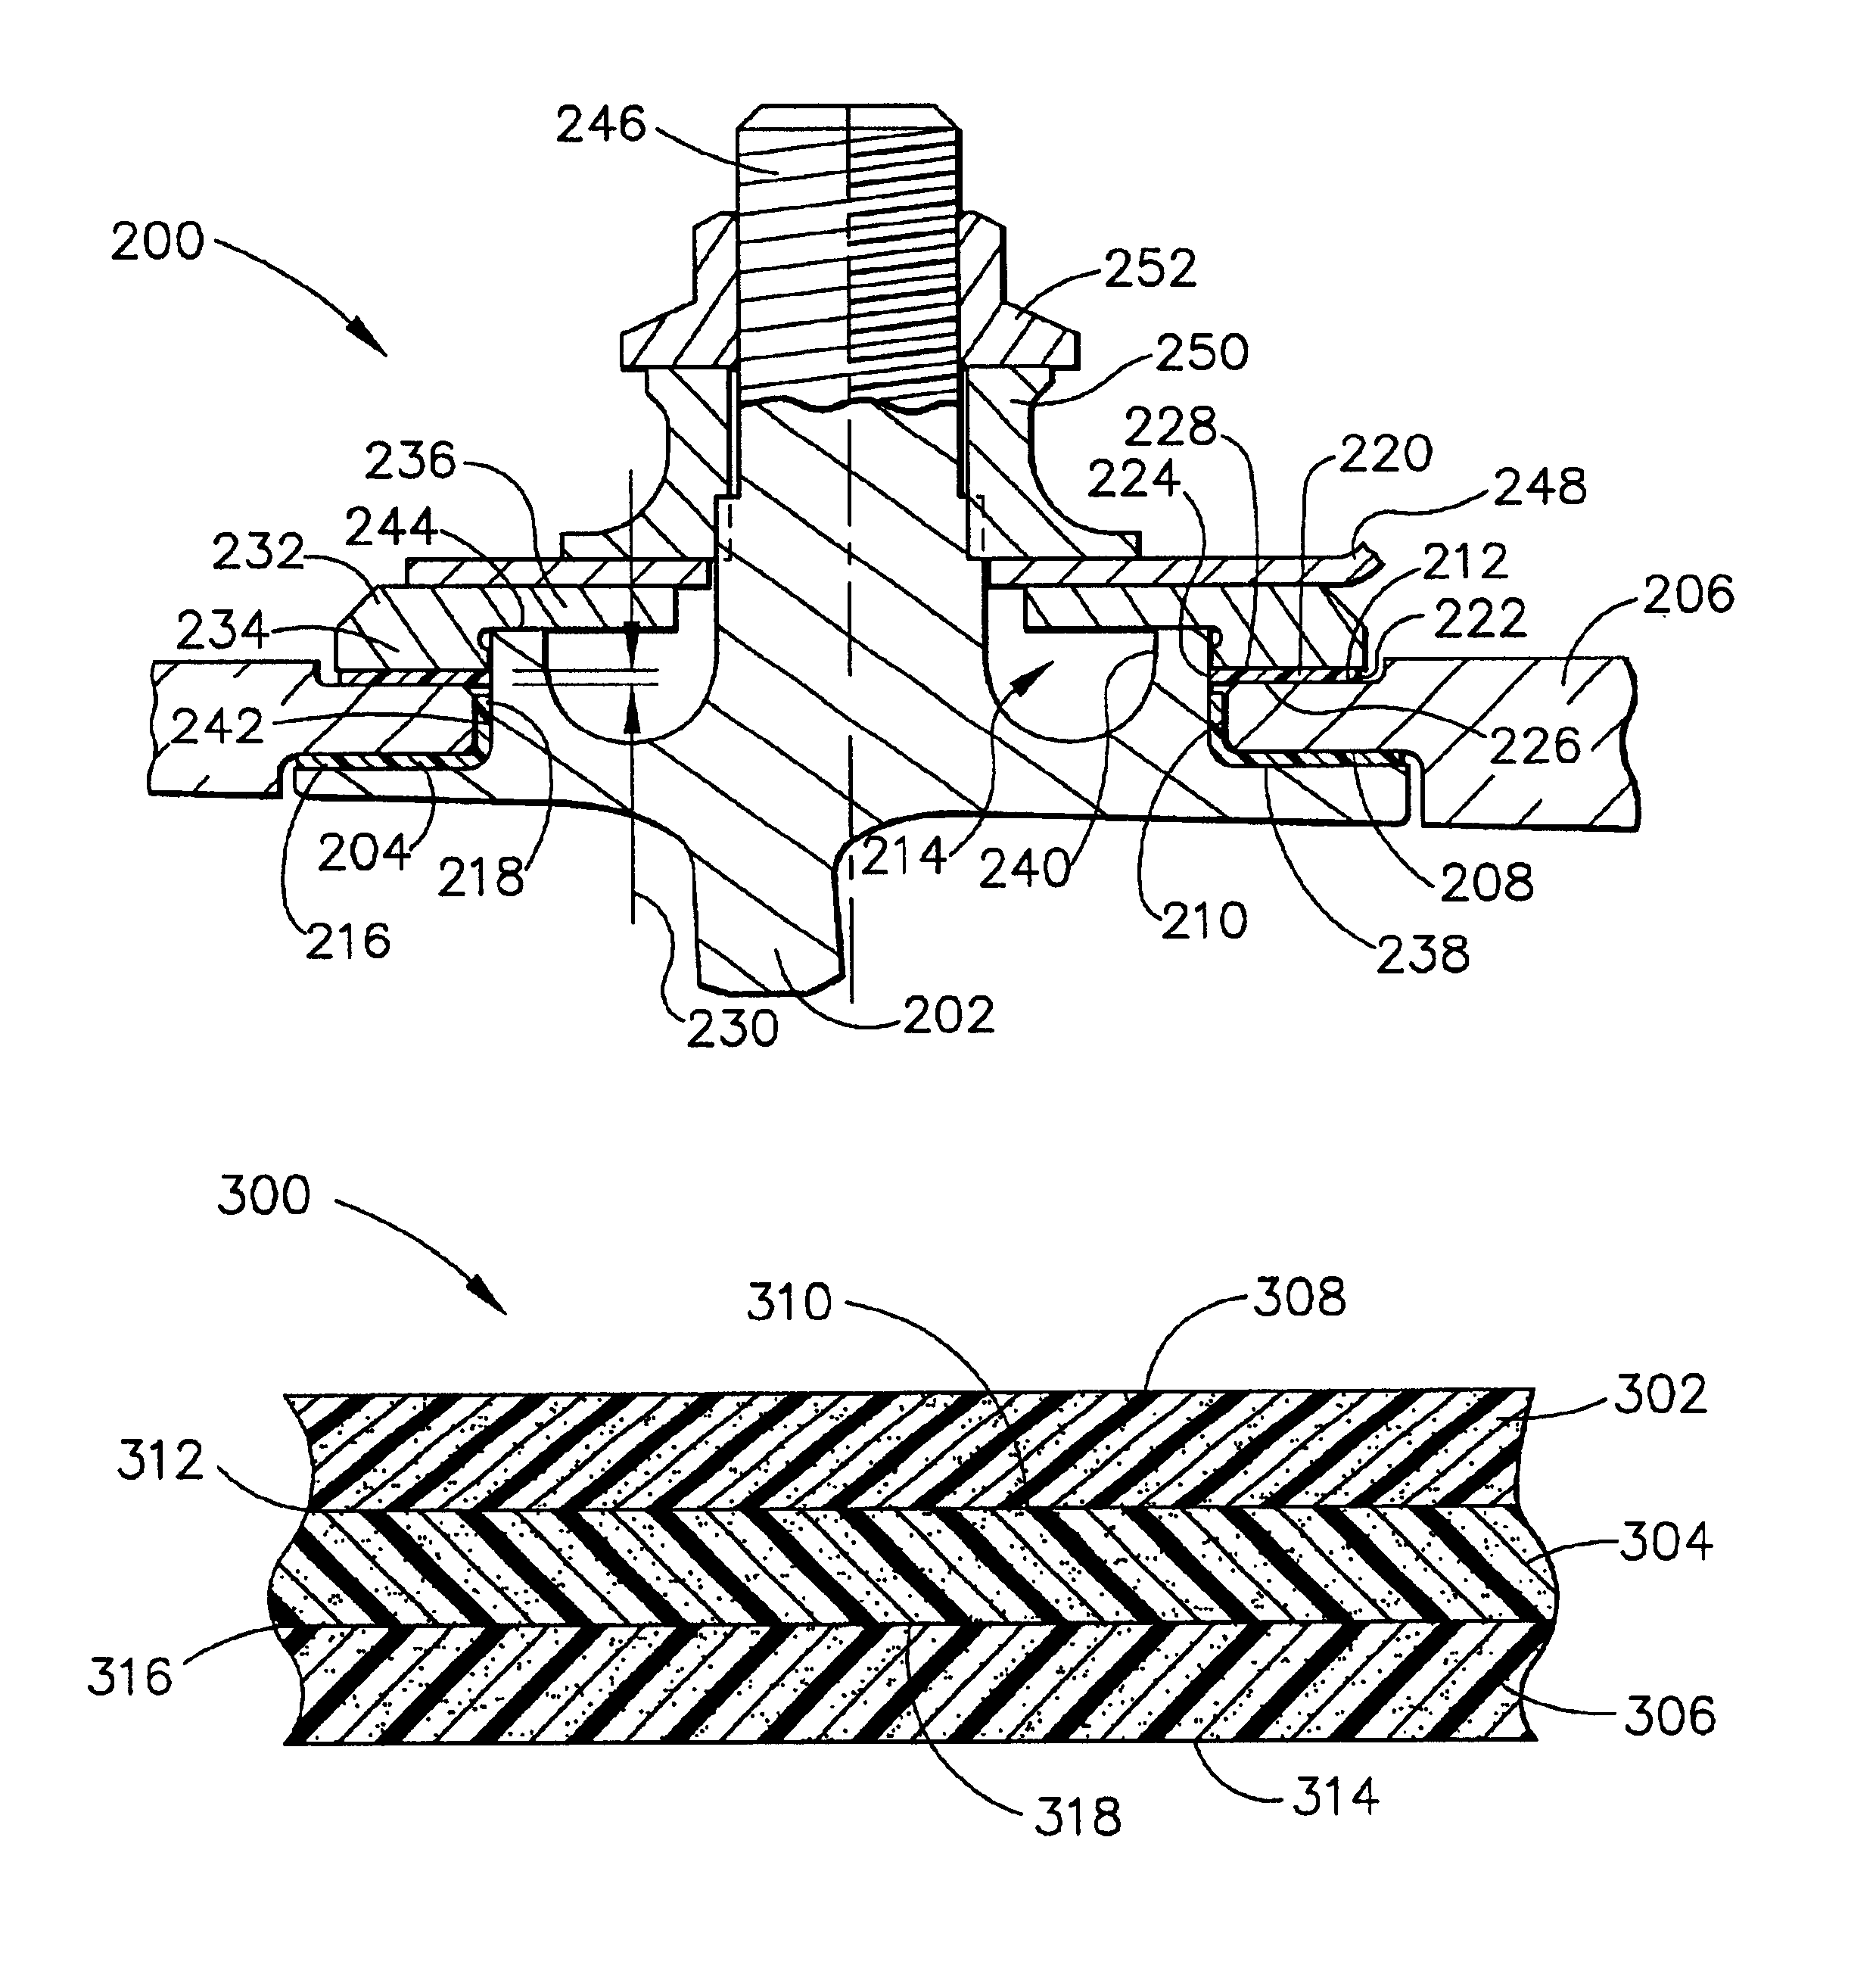 Method of manufacturing variable vane seal and washer materials